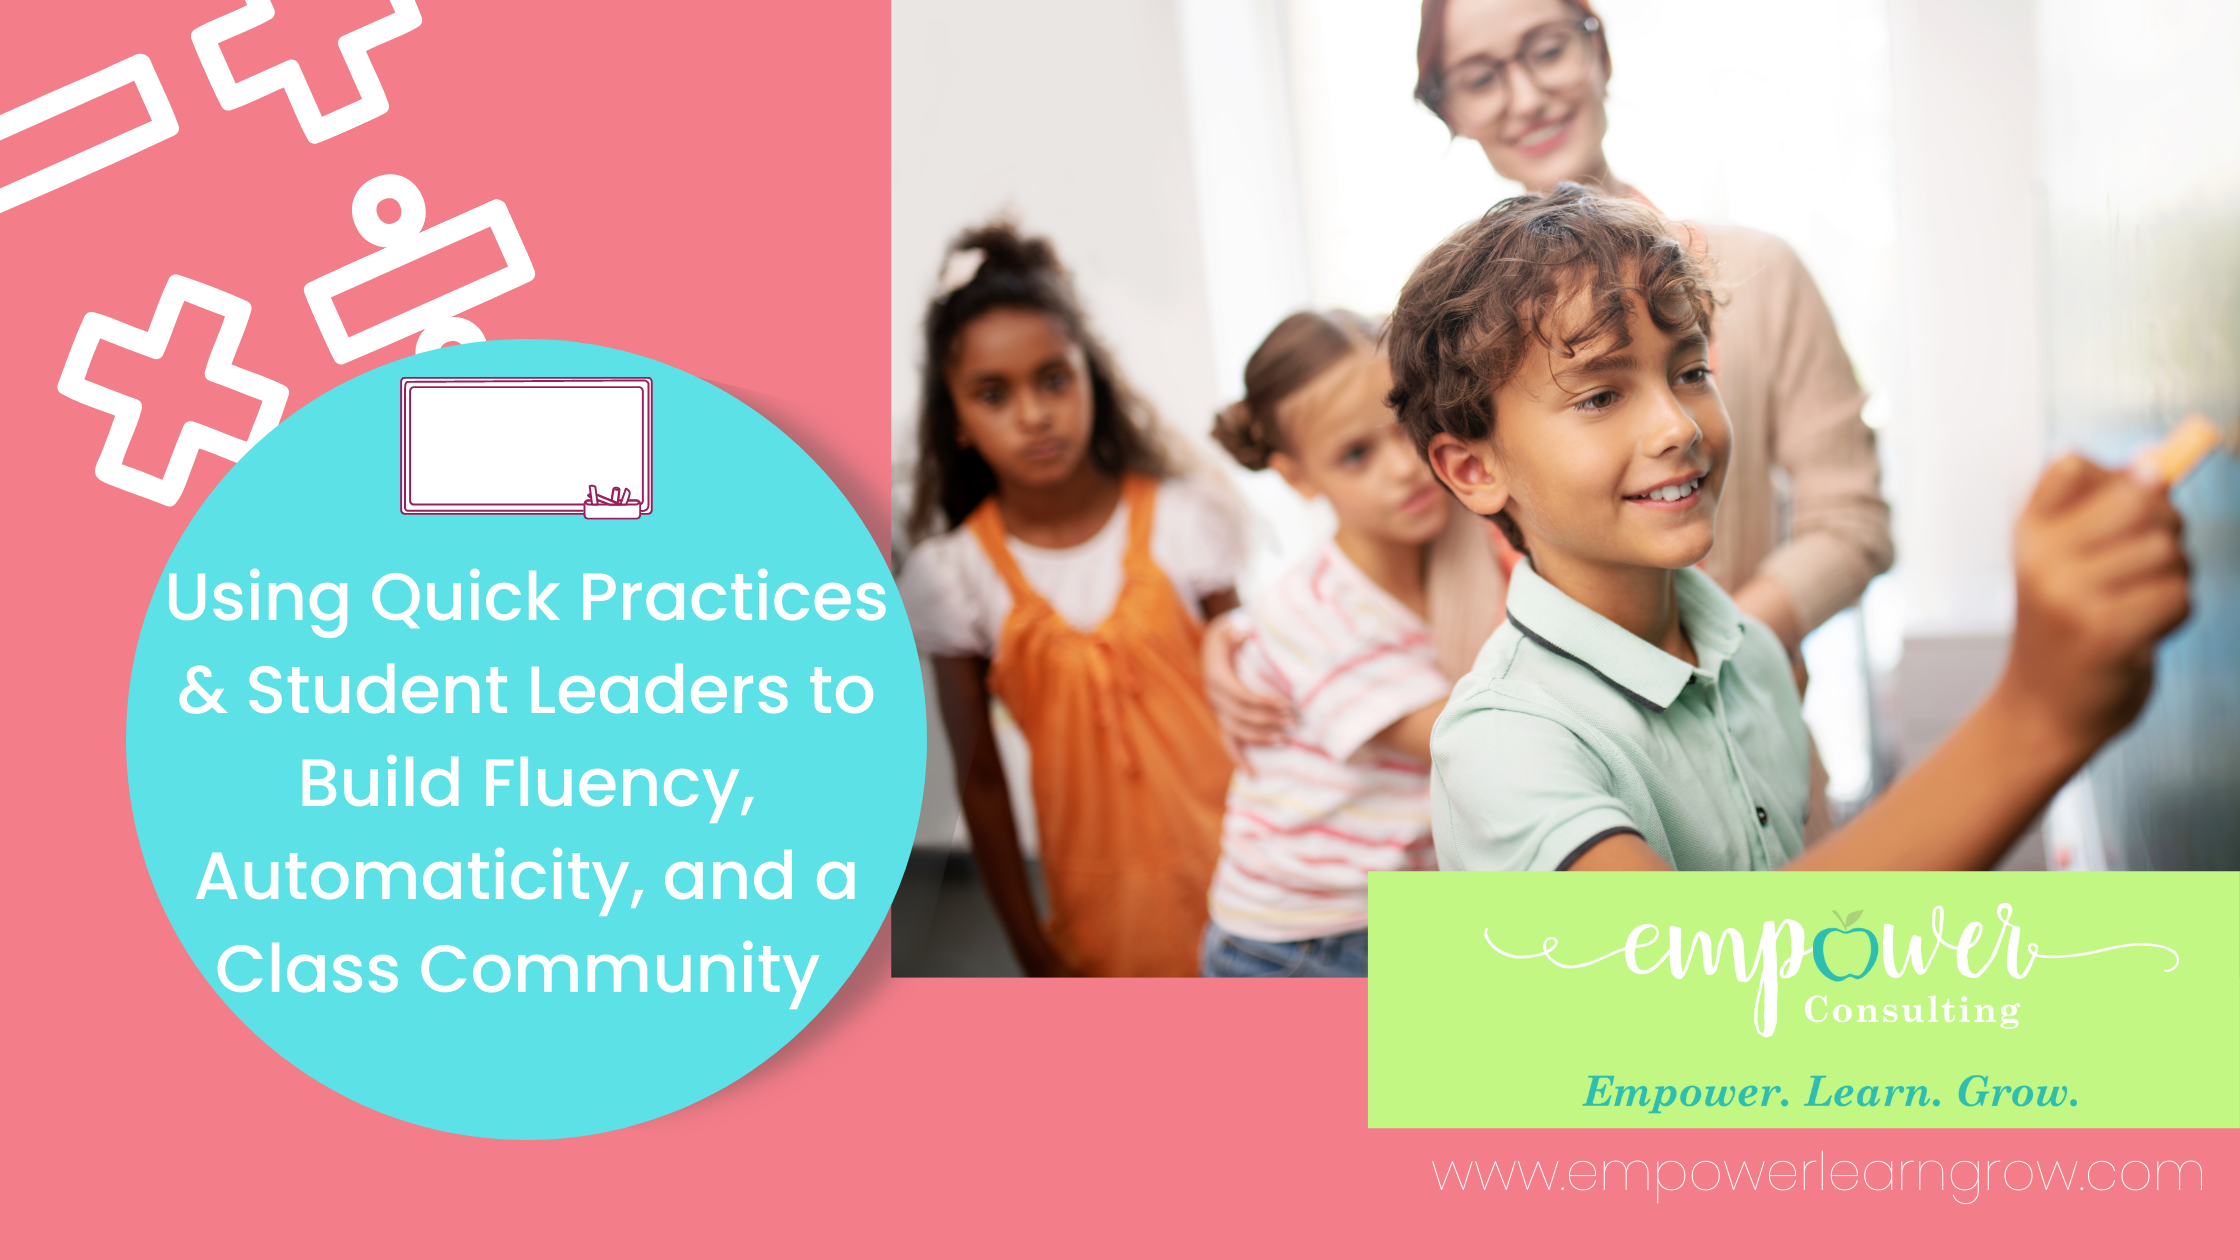 Using Quick Practices & Student Leaders to Build Fluency, Automaticity, and a Class Community